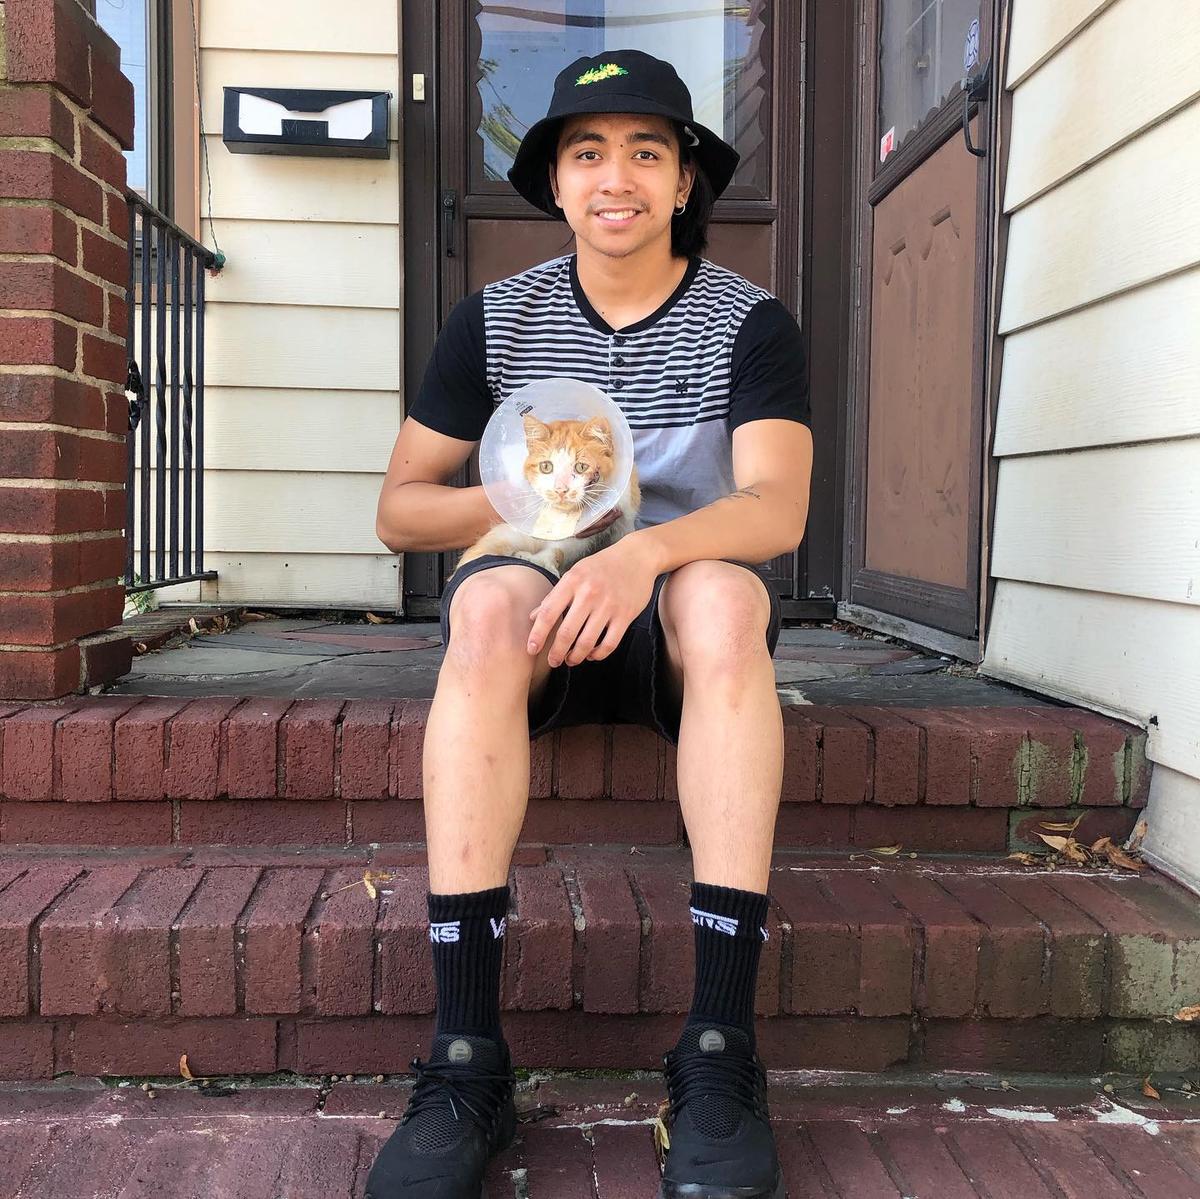 James David with his rescued cat, Gnar. (Courtesy of <a href="https://www.instagram.com/gnarkekomax_/">James David</a>)